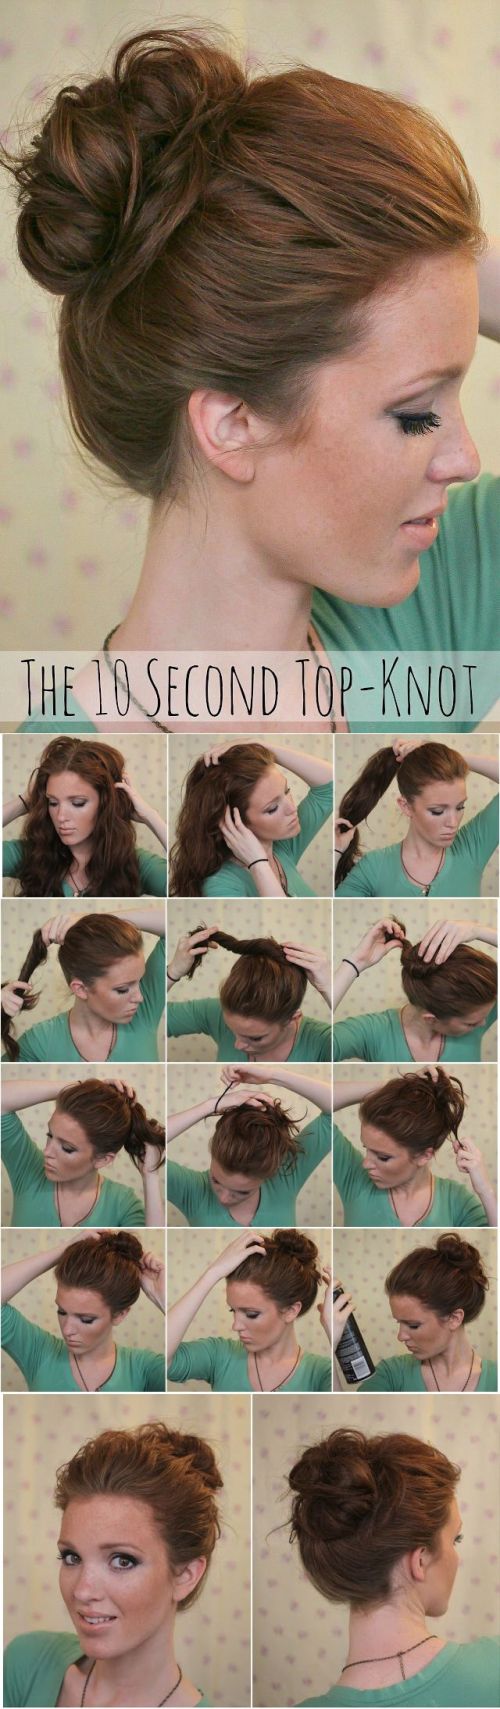 10 Second Top Knot